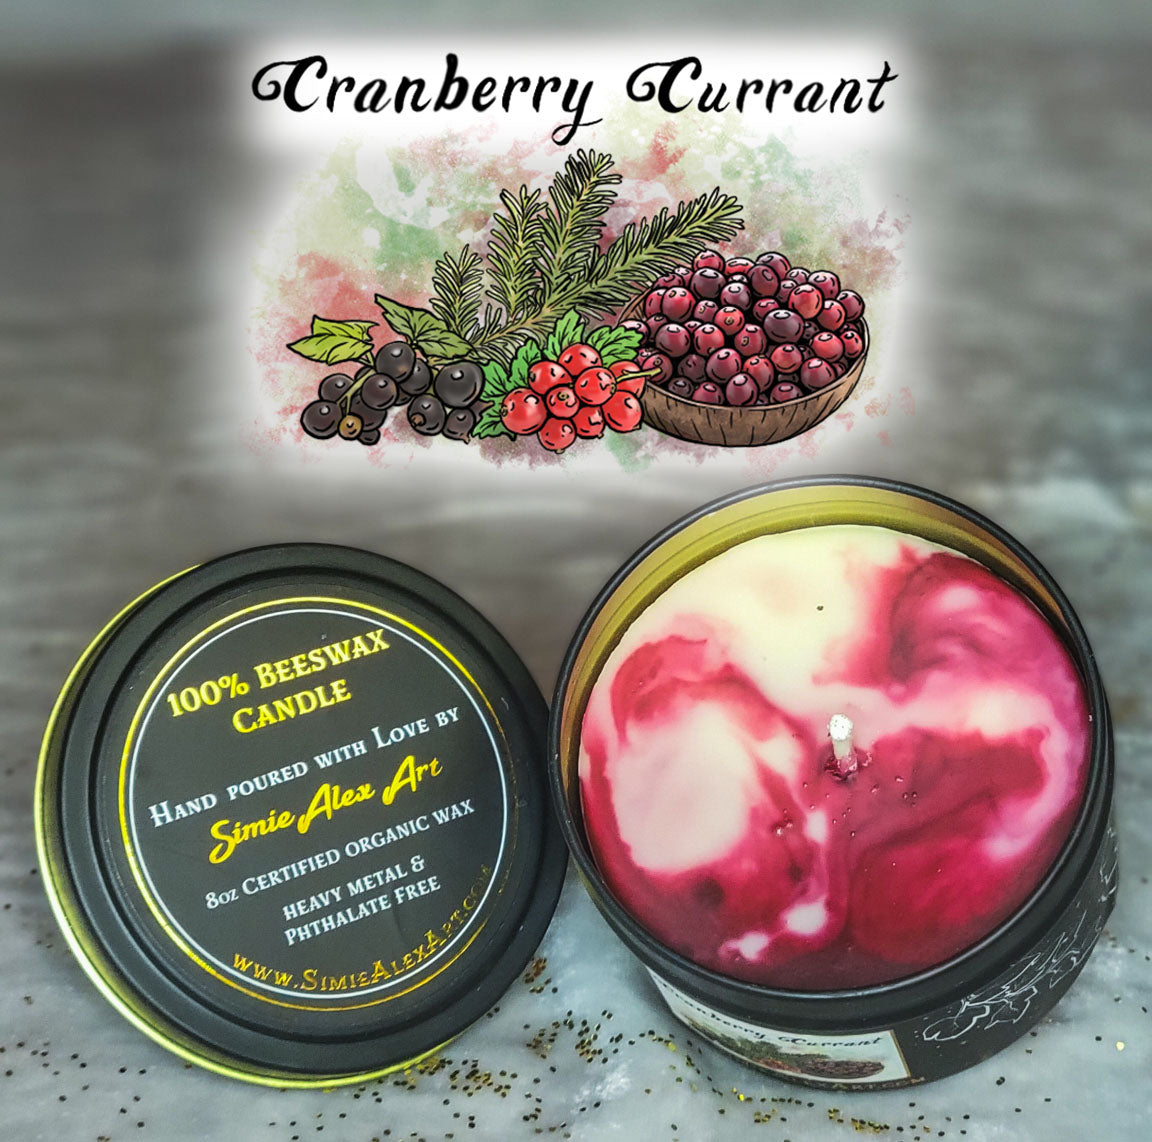 Cranberry Currant Beeswax Candle